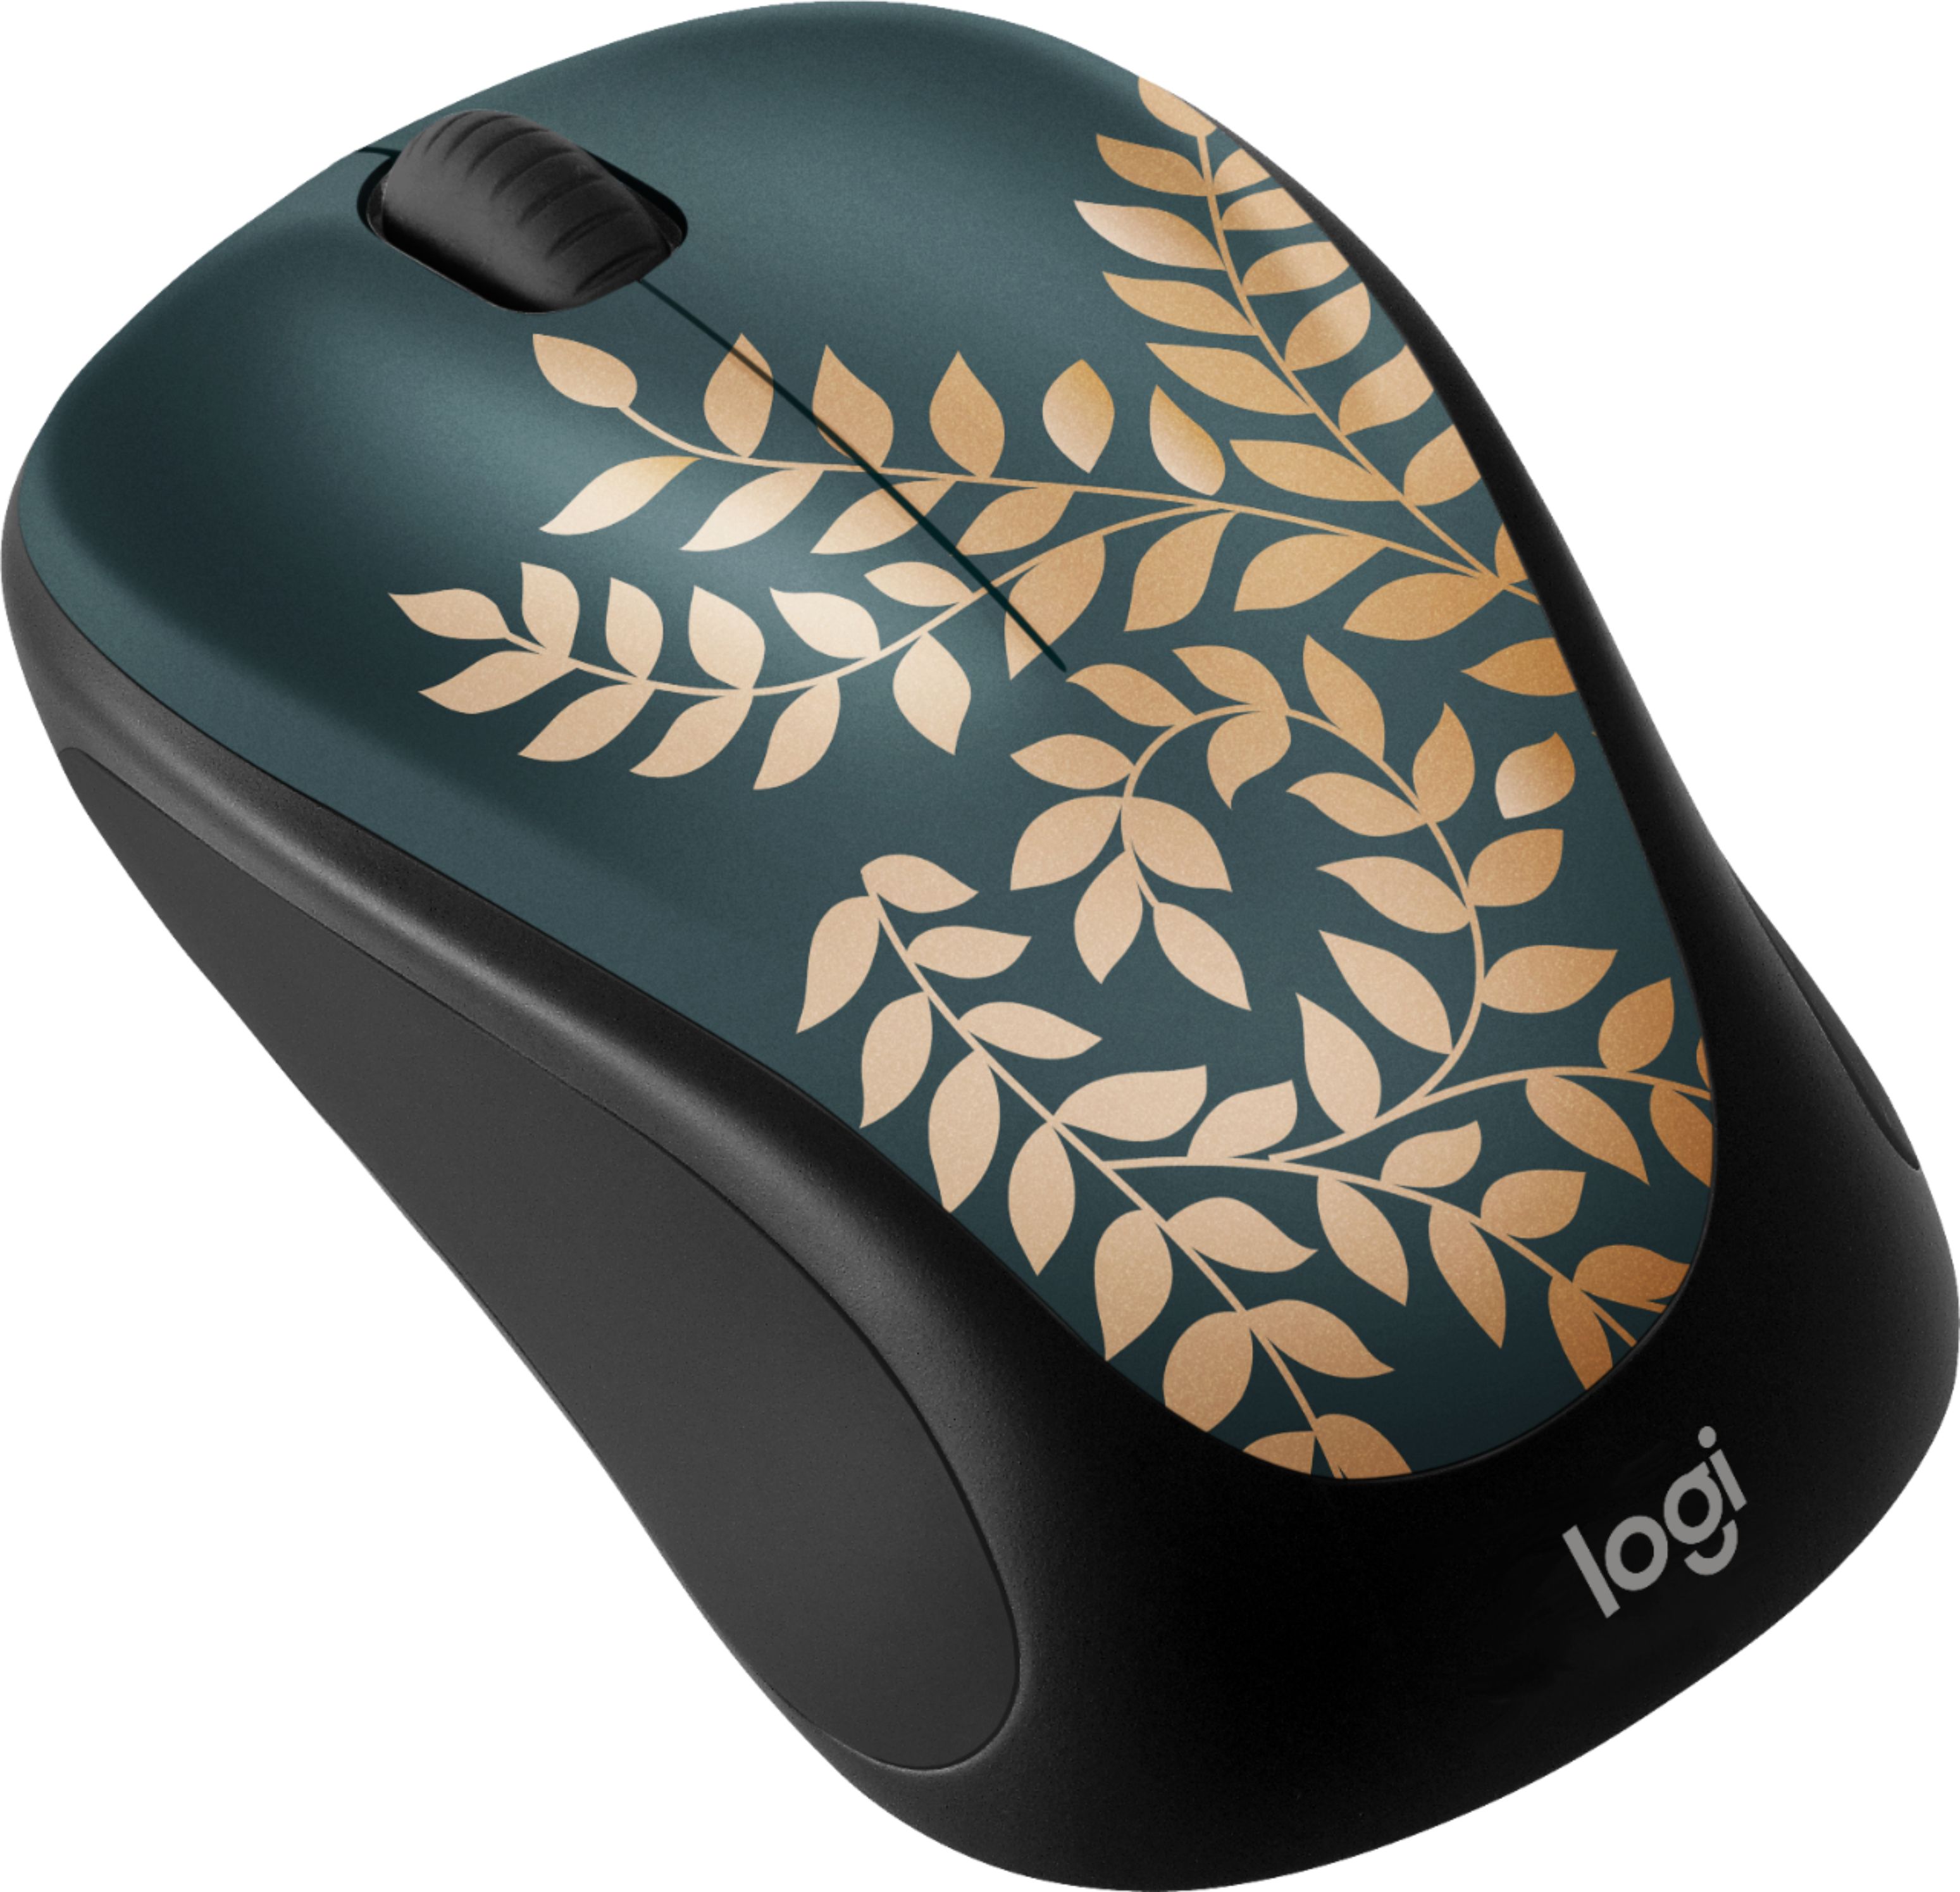 Angle View: Logitech - Design Collection Limited Edition Wireless 3-button Ambidextrous Mouse with Colorful Designs - Golden Garden